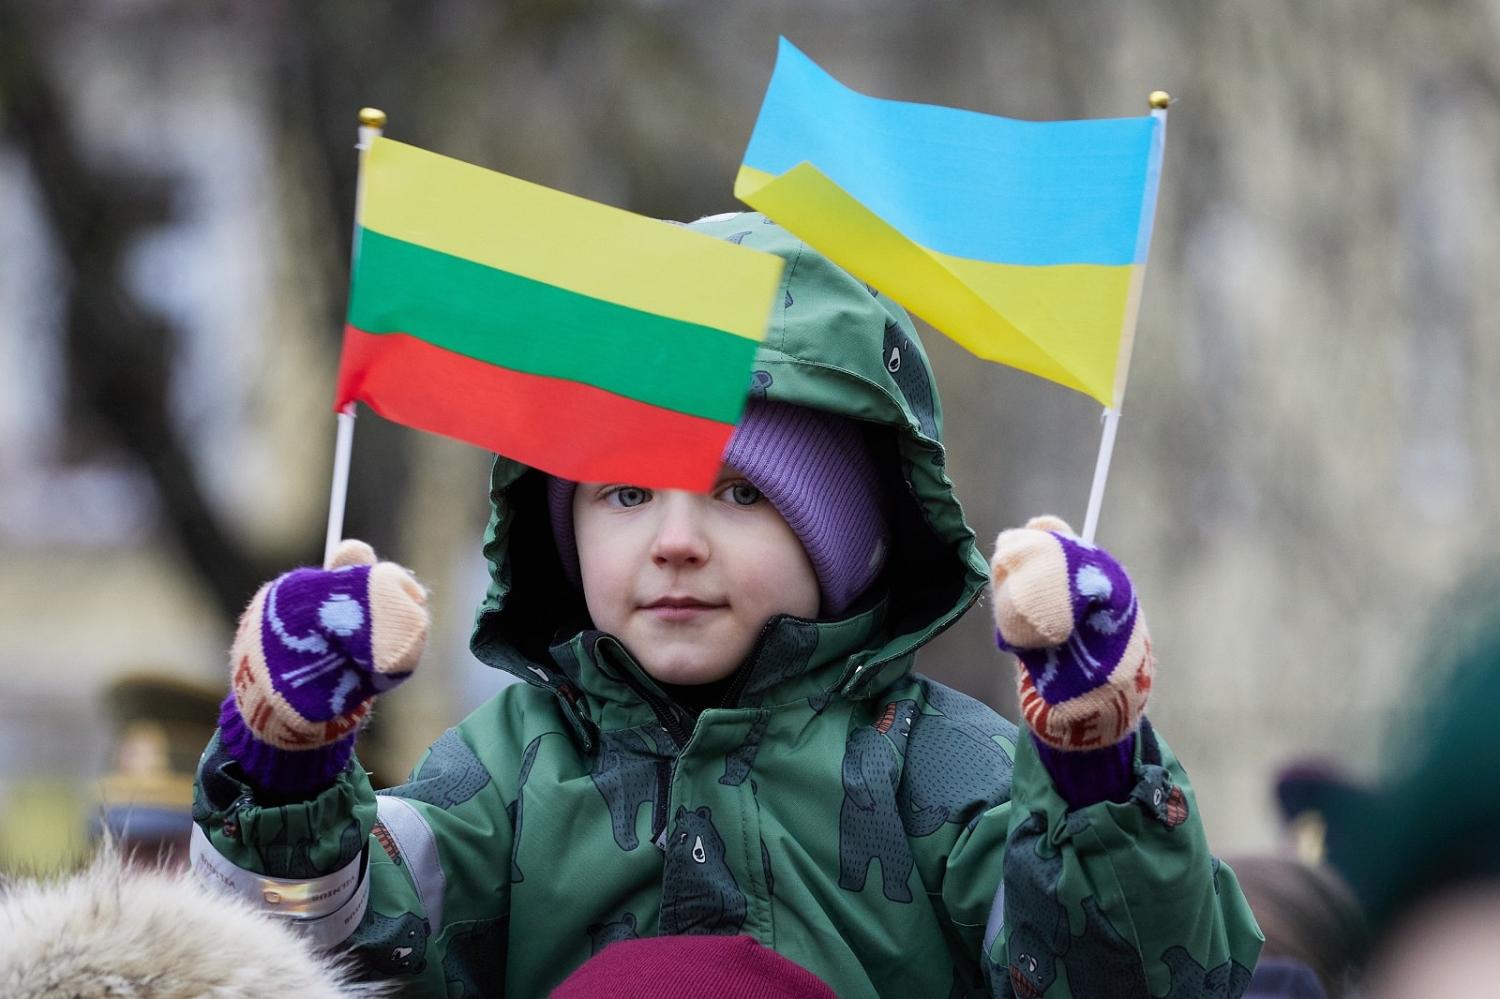 Lithuania, along with other Baltic states, has been a key supporter of Ukraine after the Russian invasion in February 2022 (Oleg Nikishin/Getty Images)